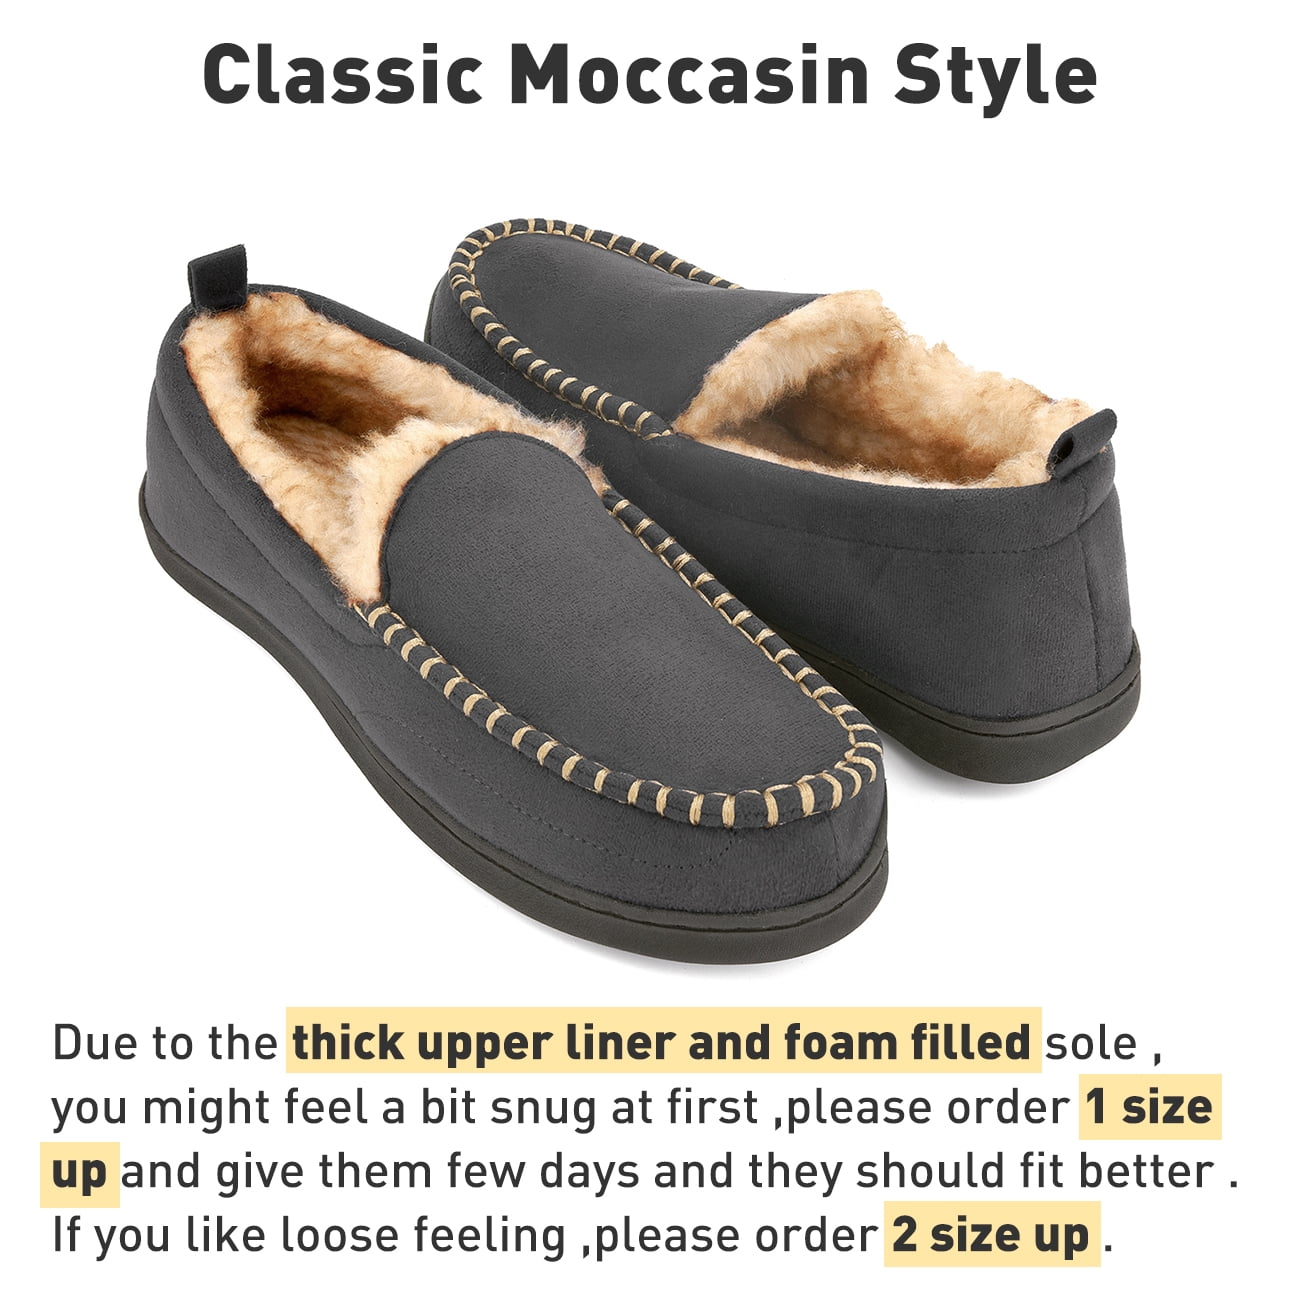 fuzzy moccasin shoes